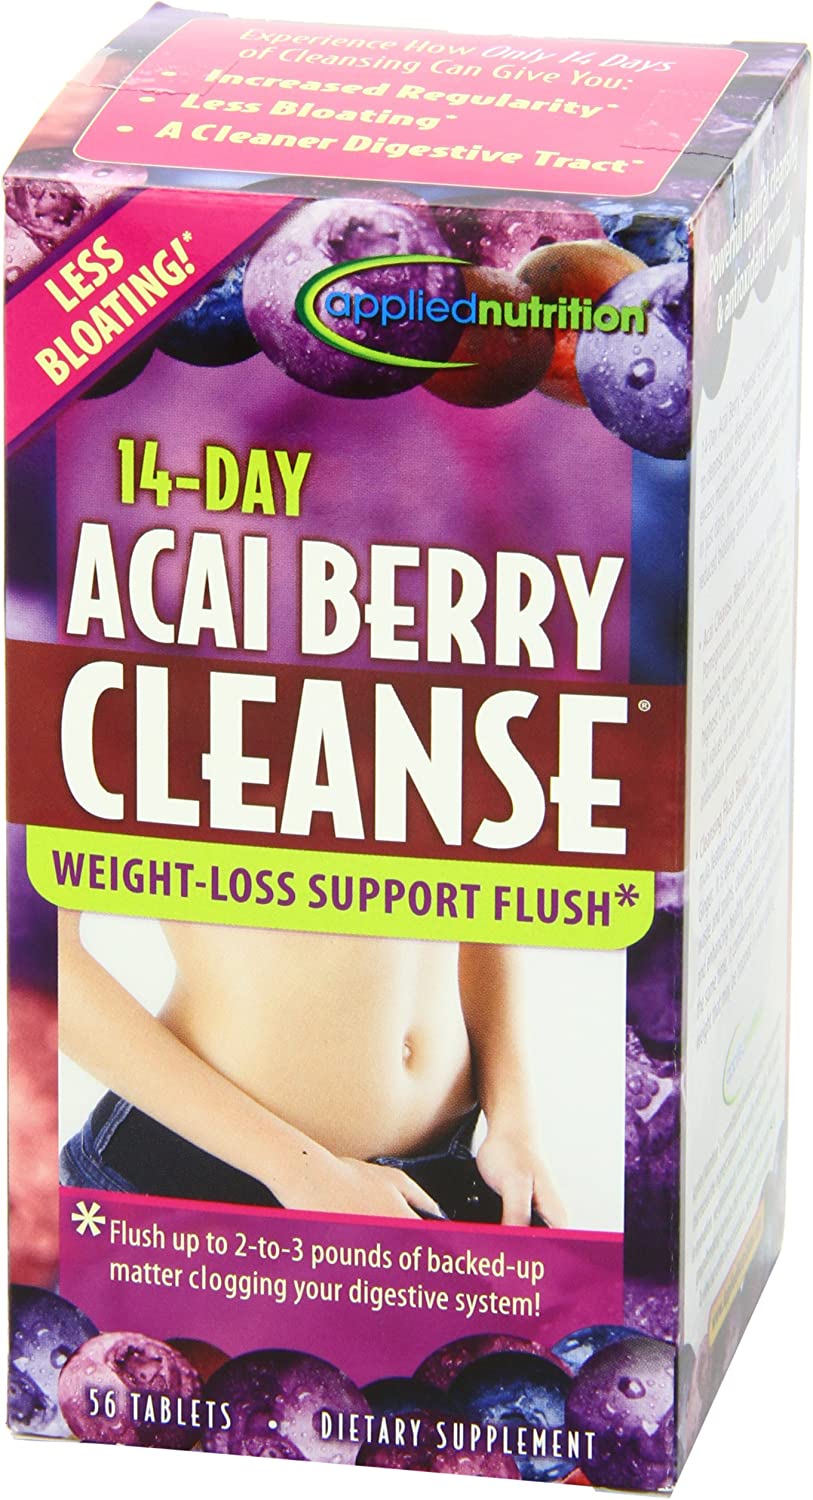 Applied Nutrition Acai Berry Cleanse Weight-Loss Support Flush Supplement Tablet, 56 Ct - image 1 of 7